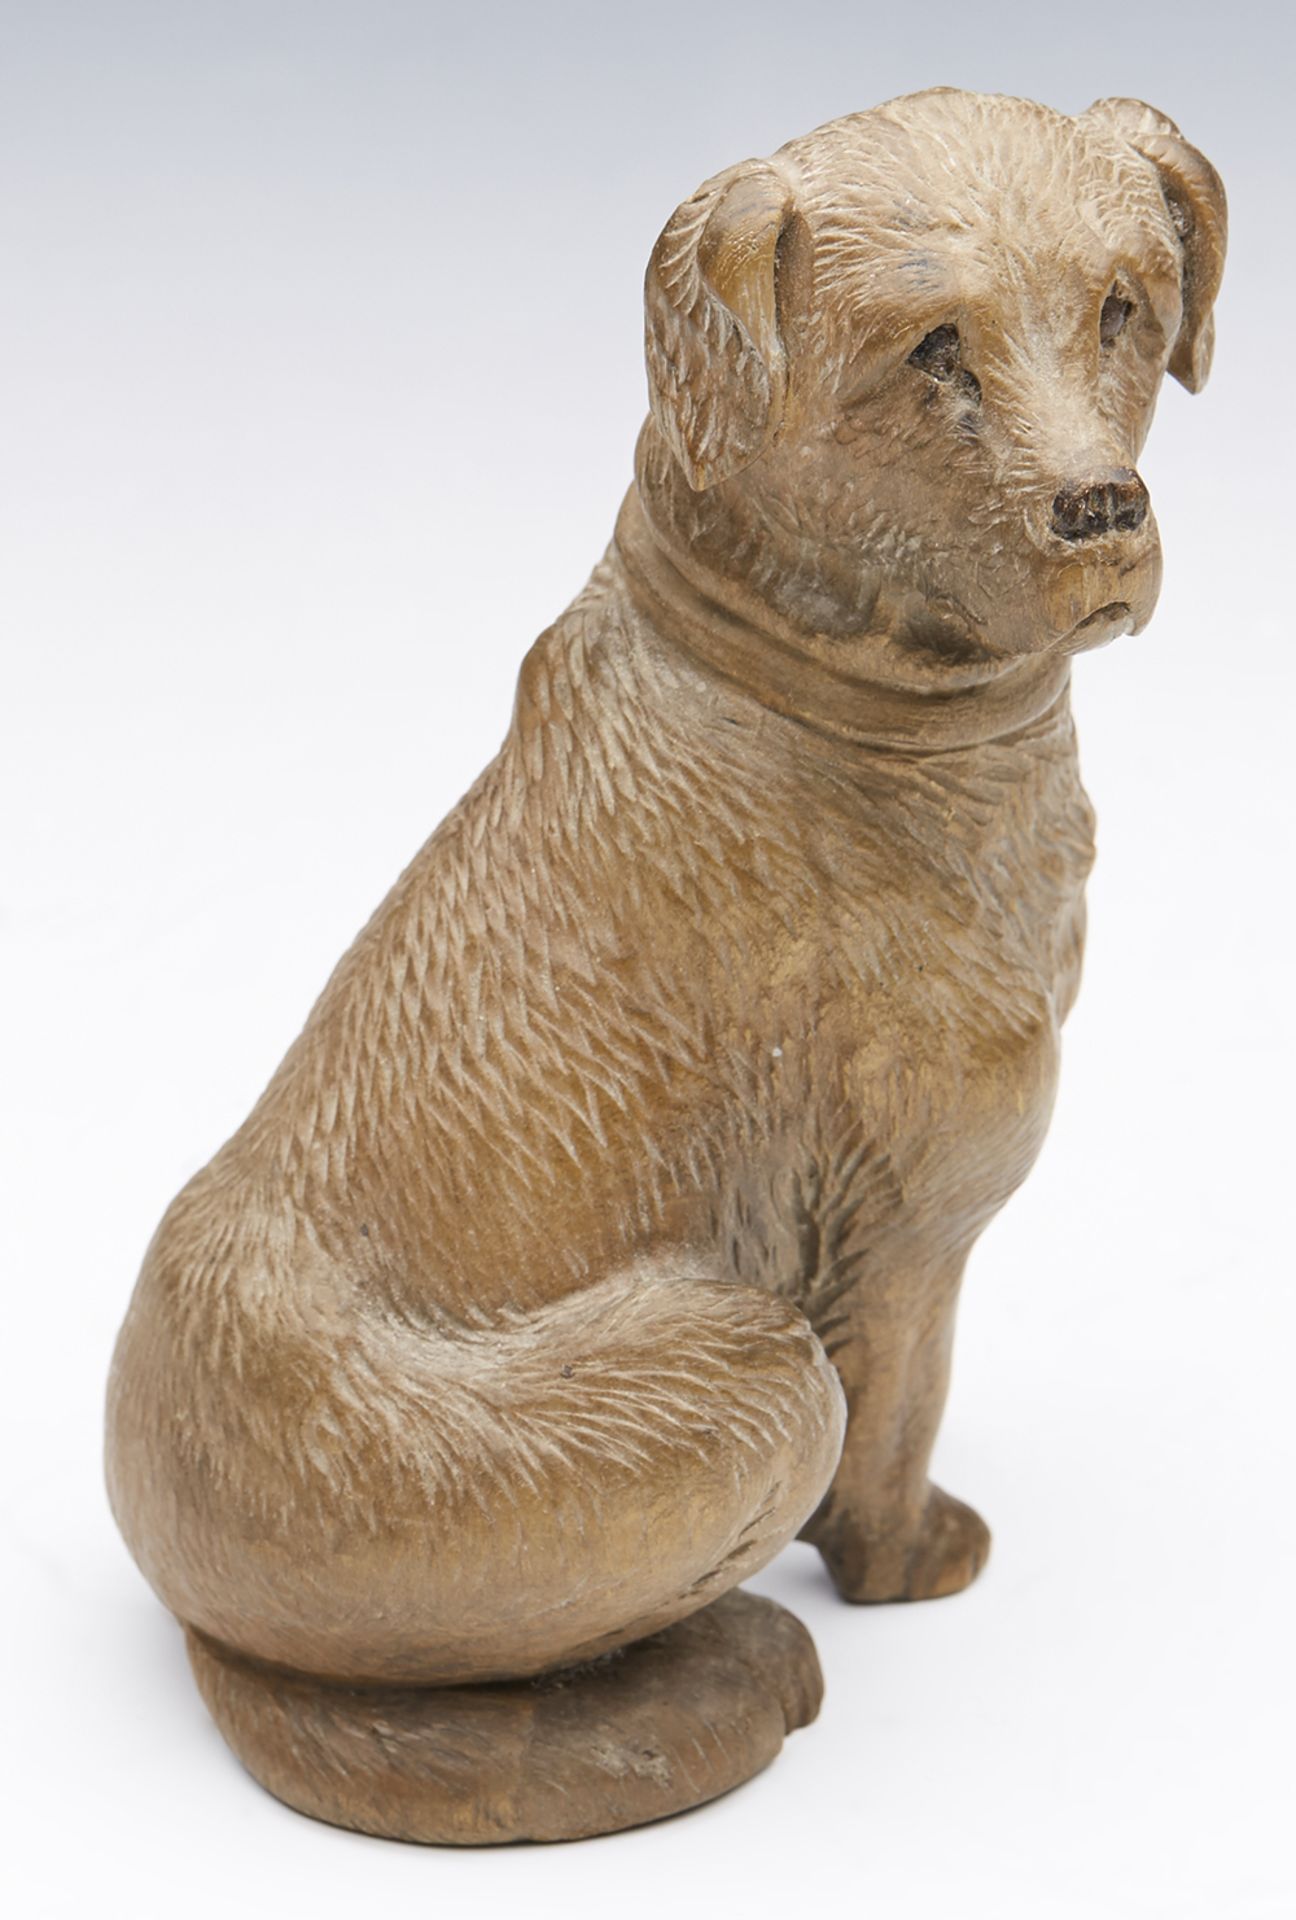 ANTIQUE CARVED BLACKFOREST FIGURE OF A SEATED DOG 19TH C.   DIMENSIONS   Height 10,5cm, Length 7cm - Image 13 of 14